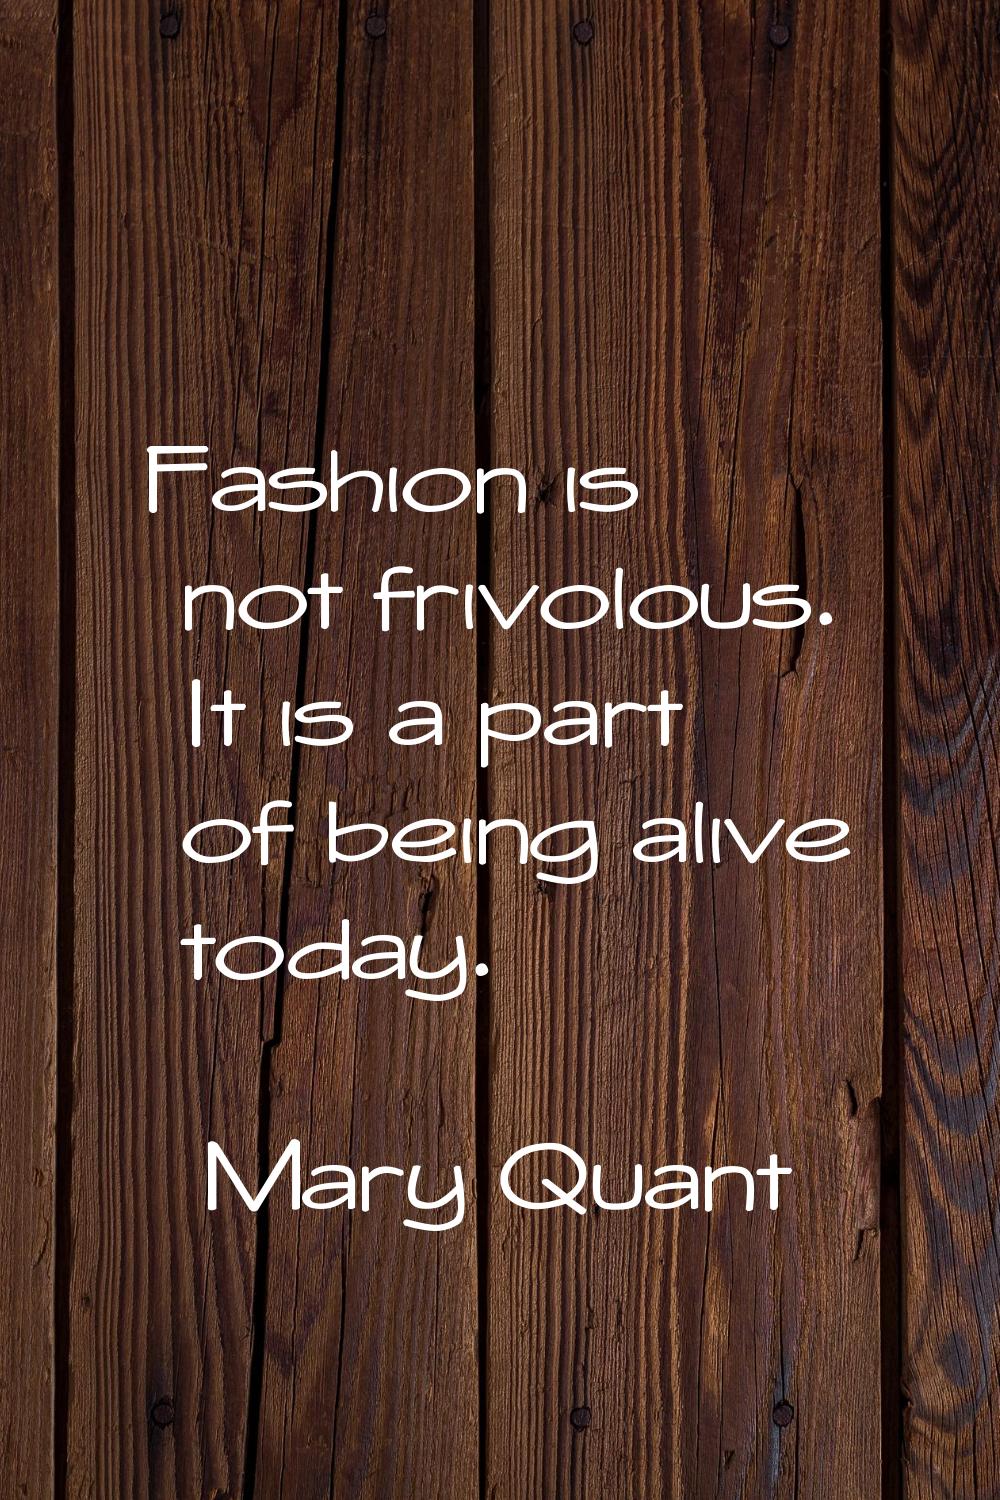 Fashion is not frivolous. It is a part of being alive today.